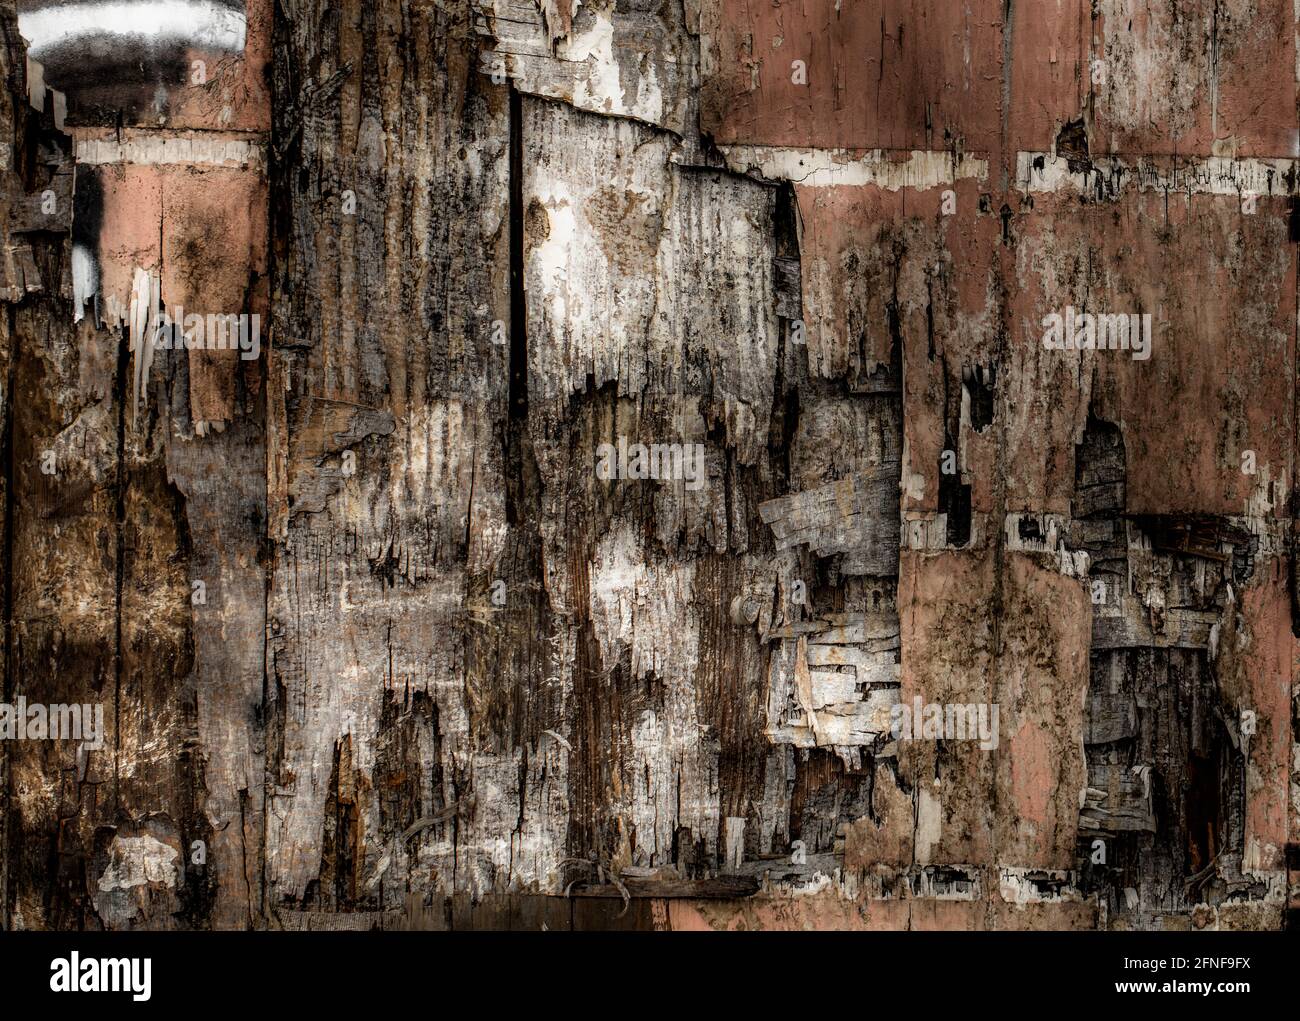 Old weathered and broken wood siding on building in need of repair Stock Photo